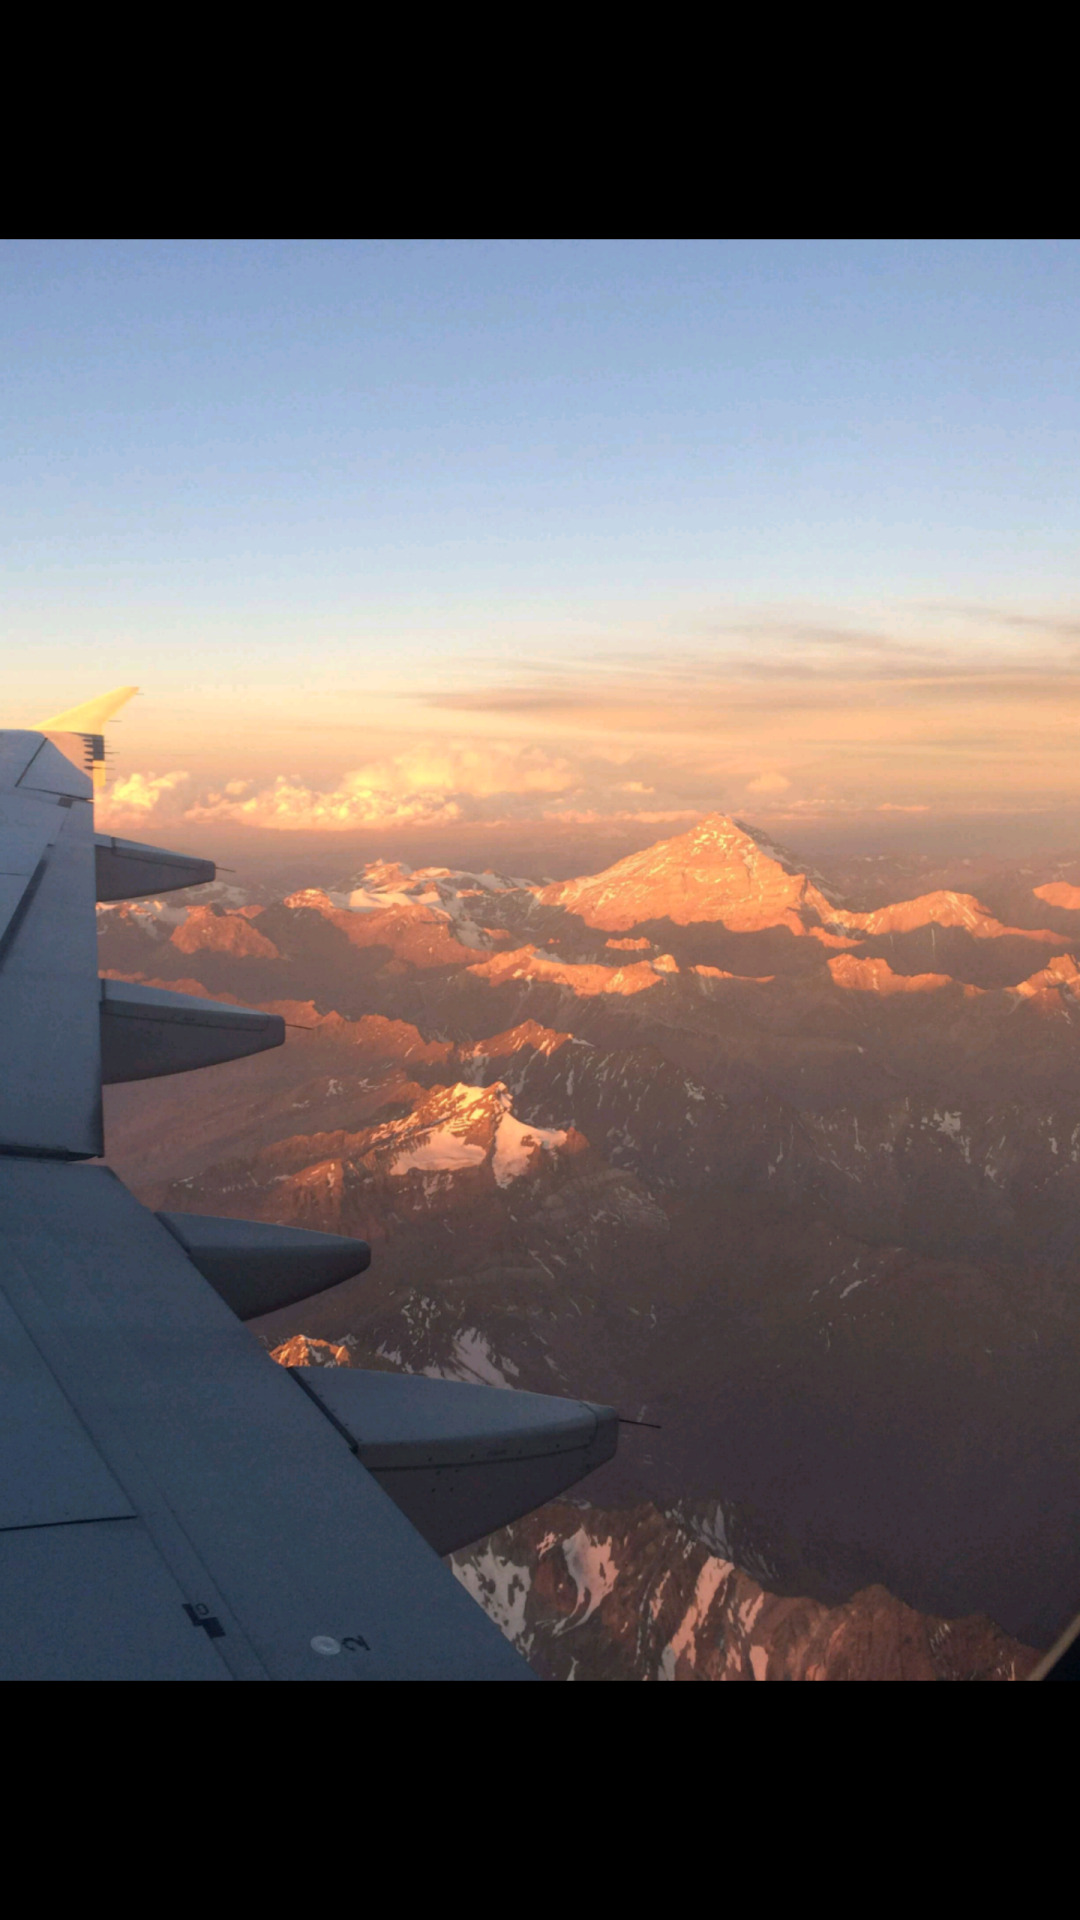 Los Andes from above (Thanks Juan for the photo!).